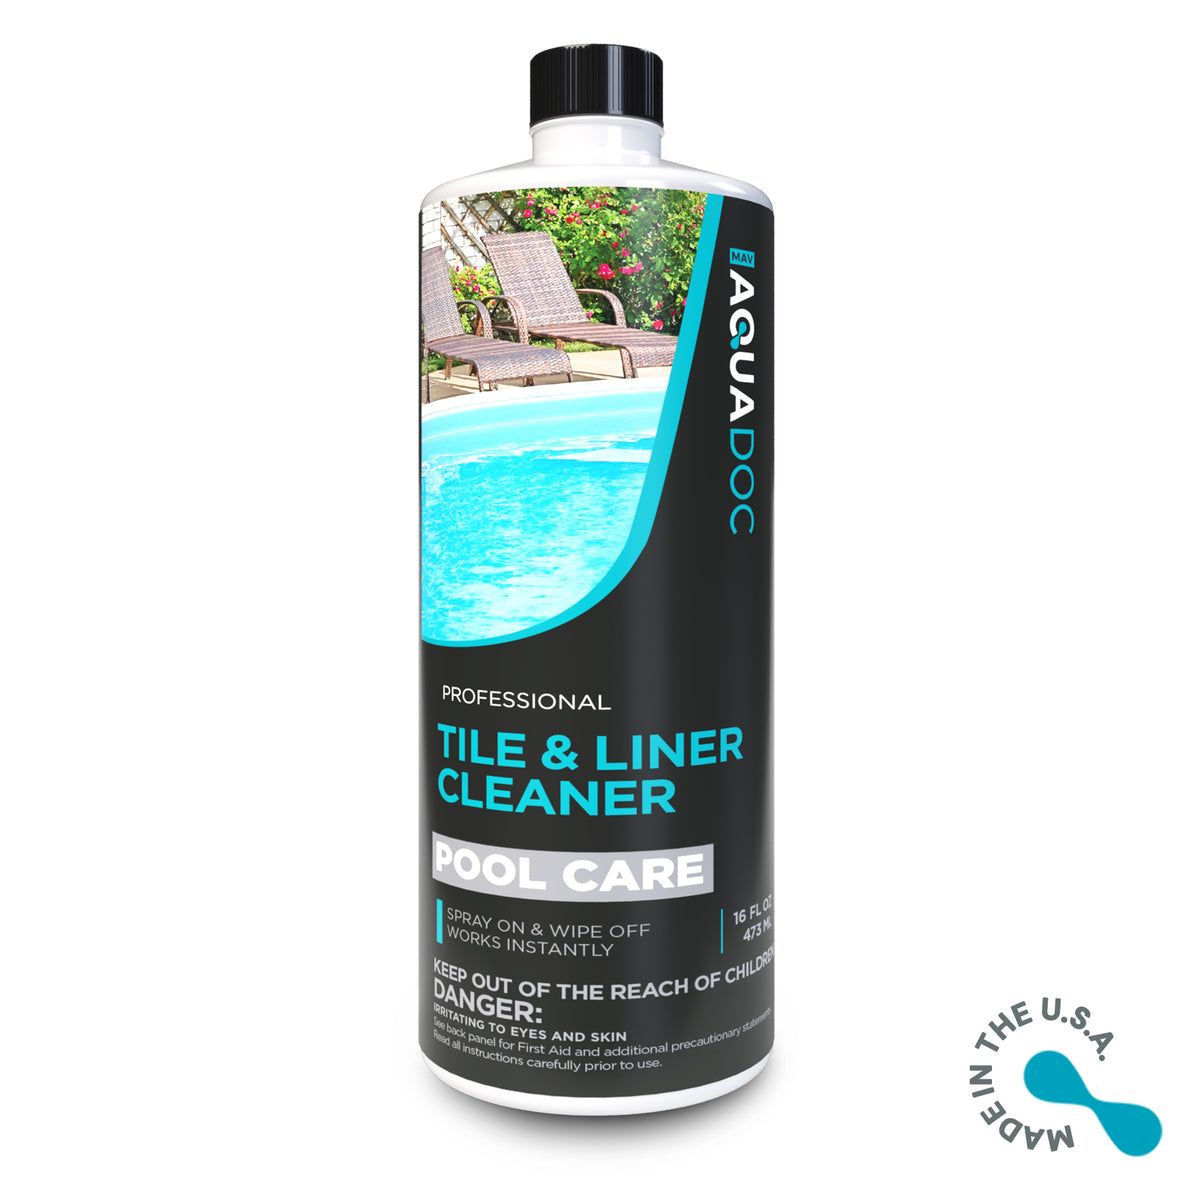 Revitalize Your Pool with AquaDoc's Pool Tile & Vinyl Cleaner